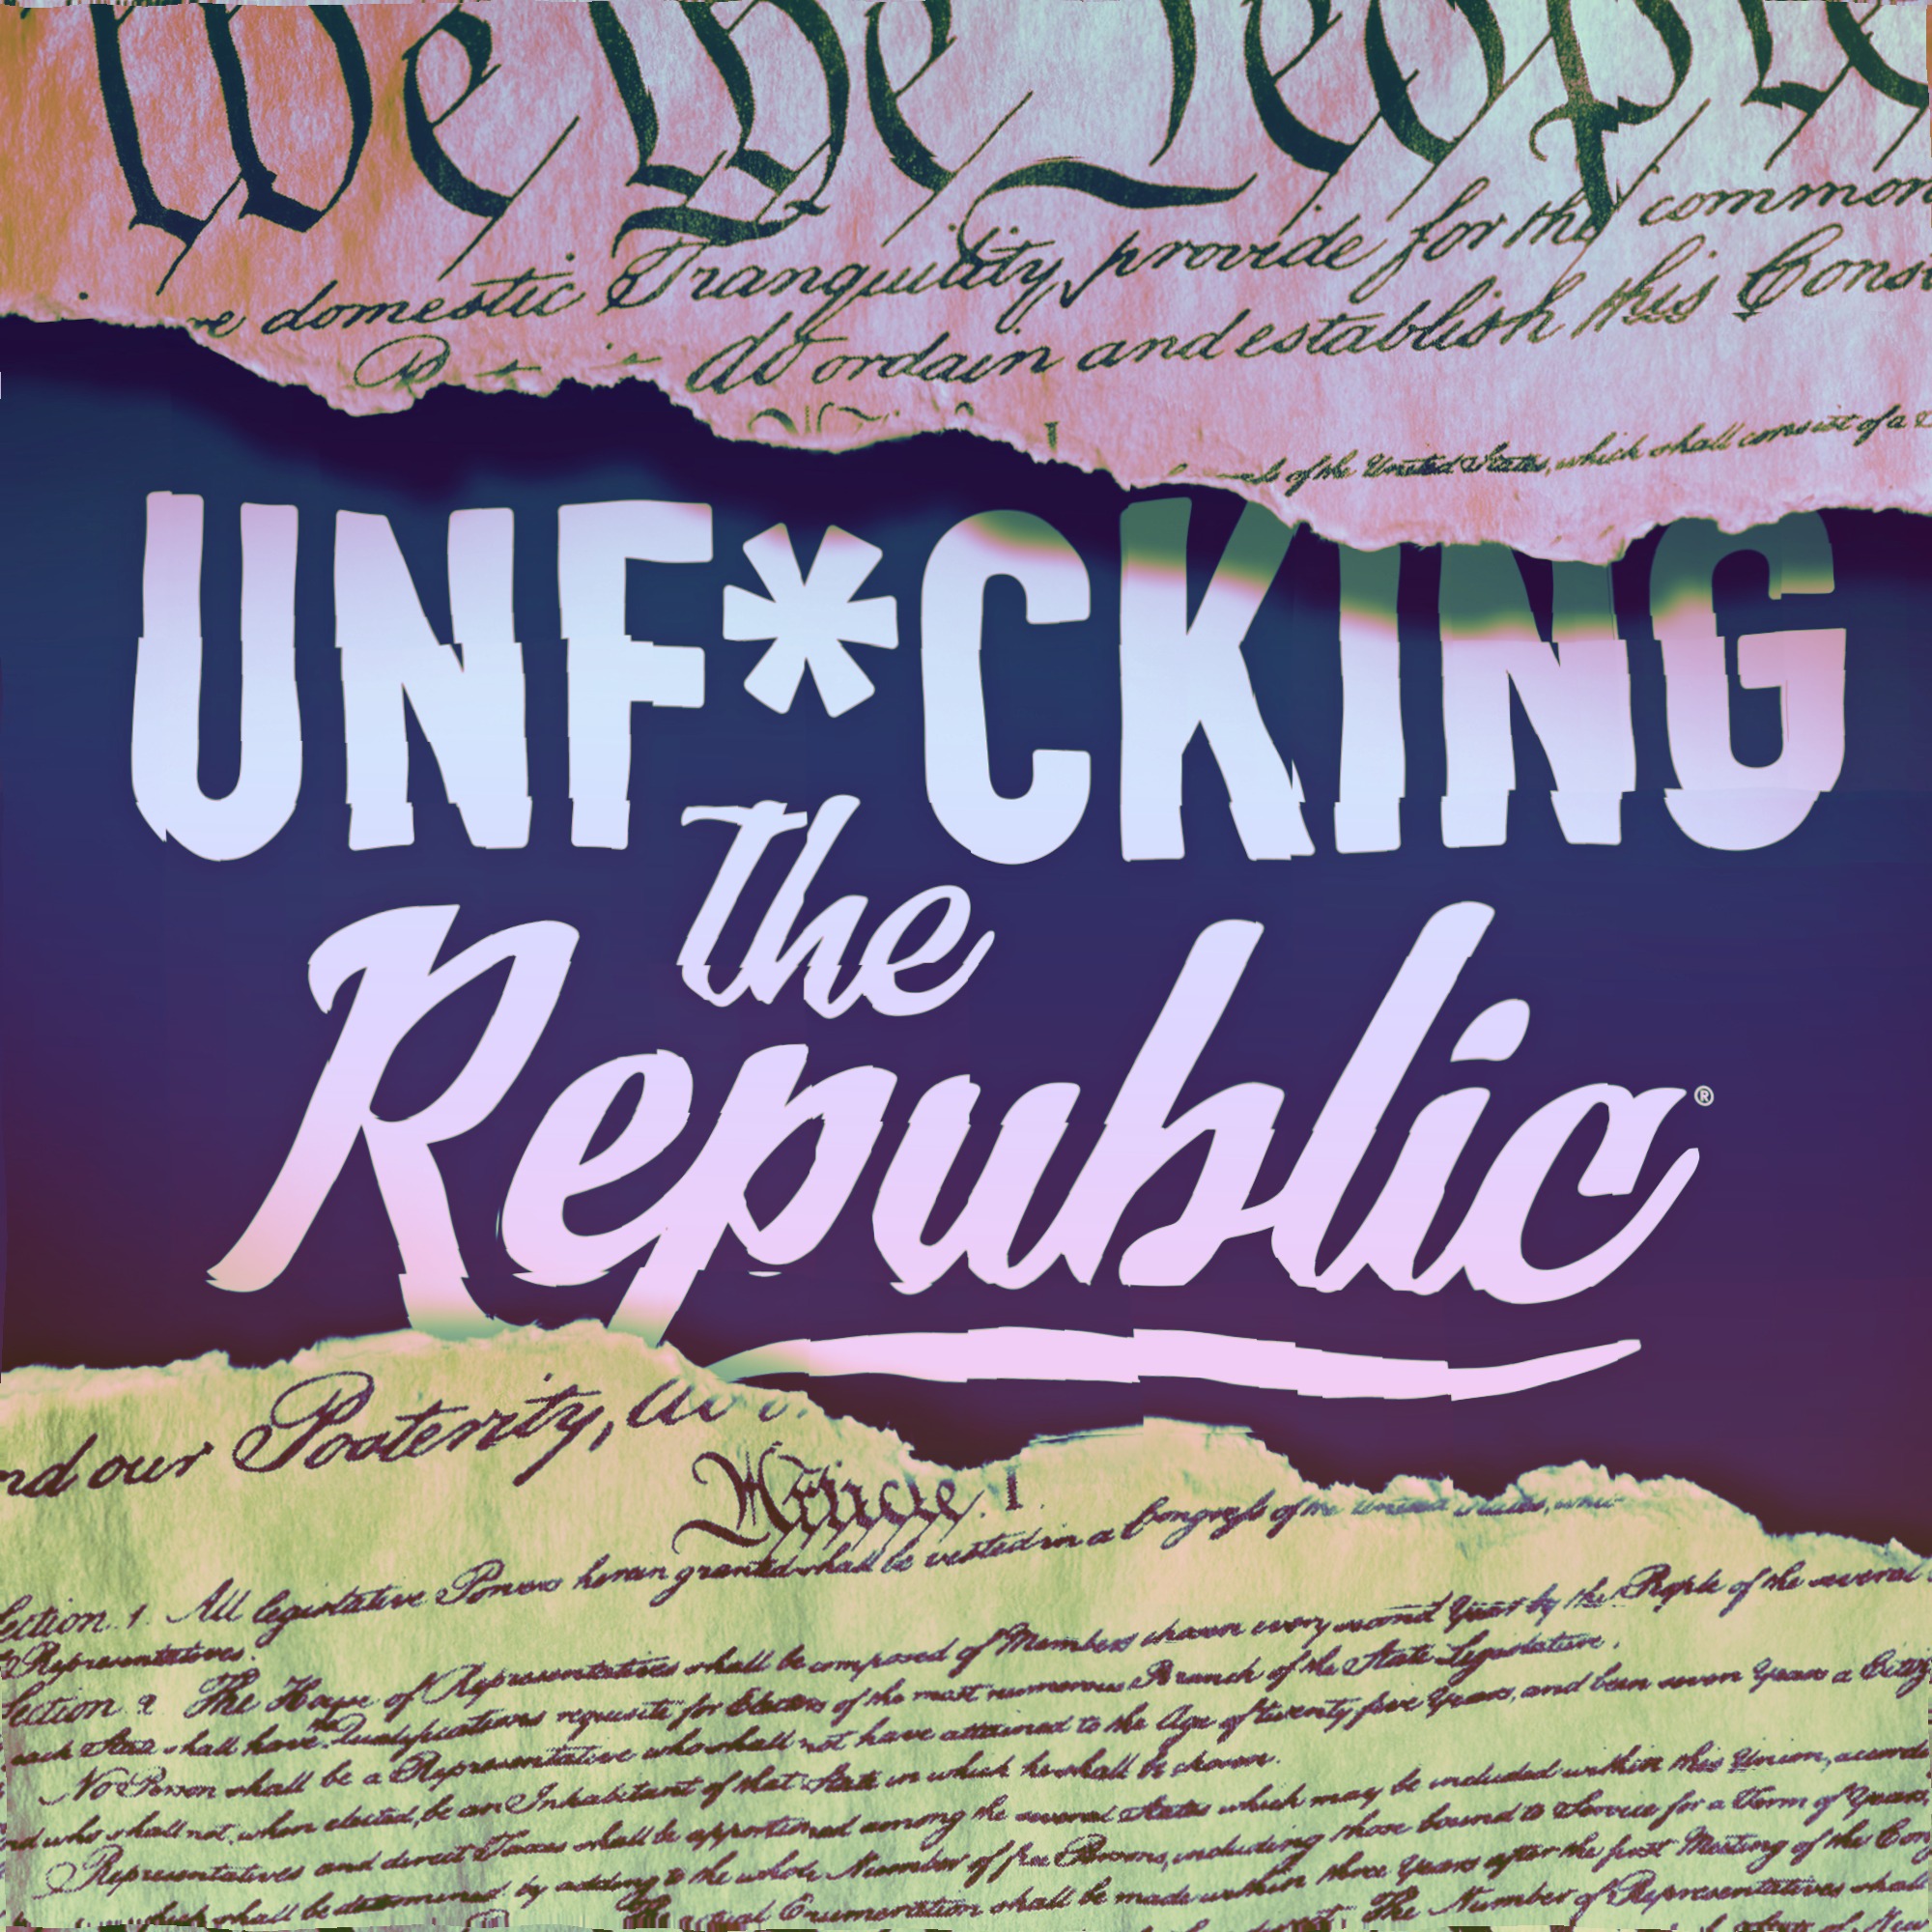 The US Constitution ripped in the middle revealing white text on a blue background that says, ‘Unf*cking the Republic.’ Letters have a glitchy rainbow effect on them.